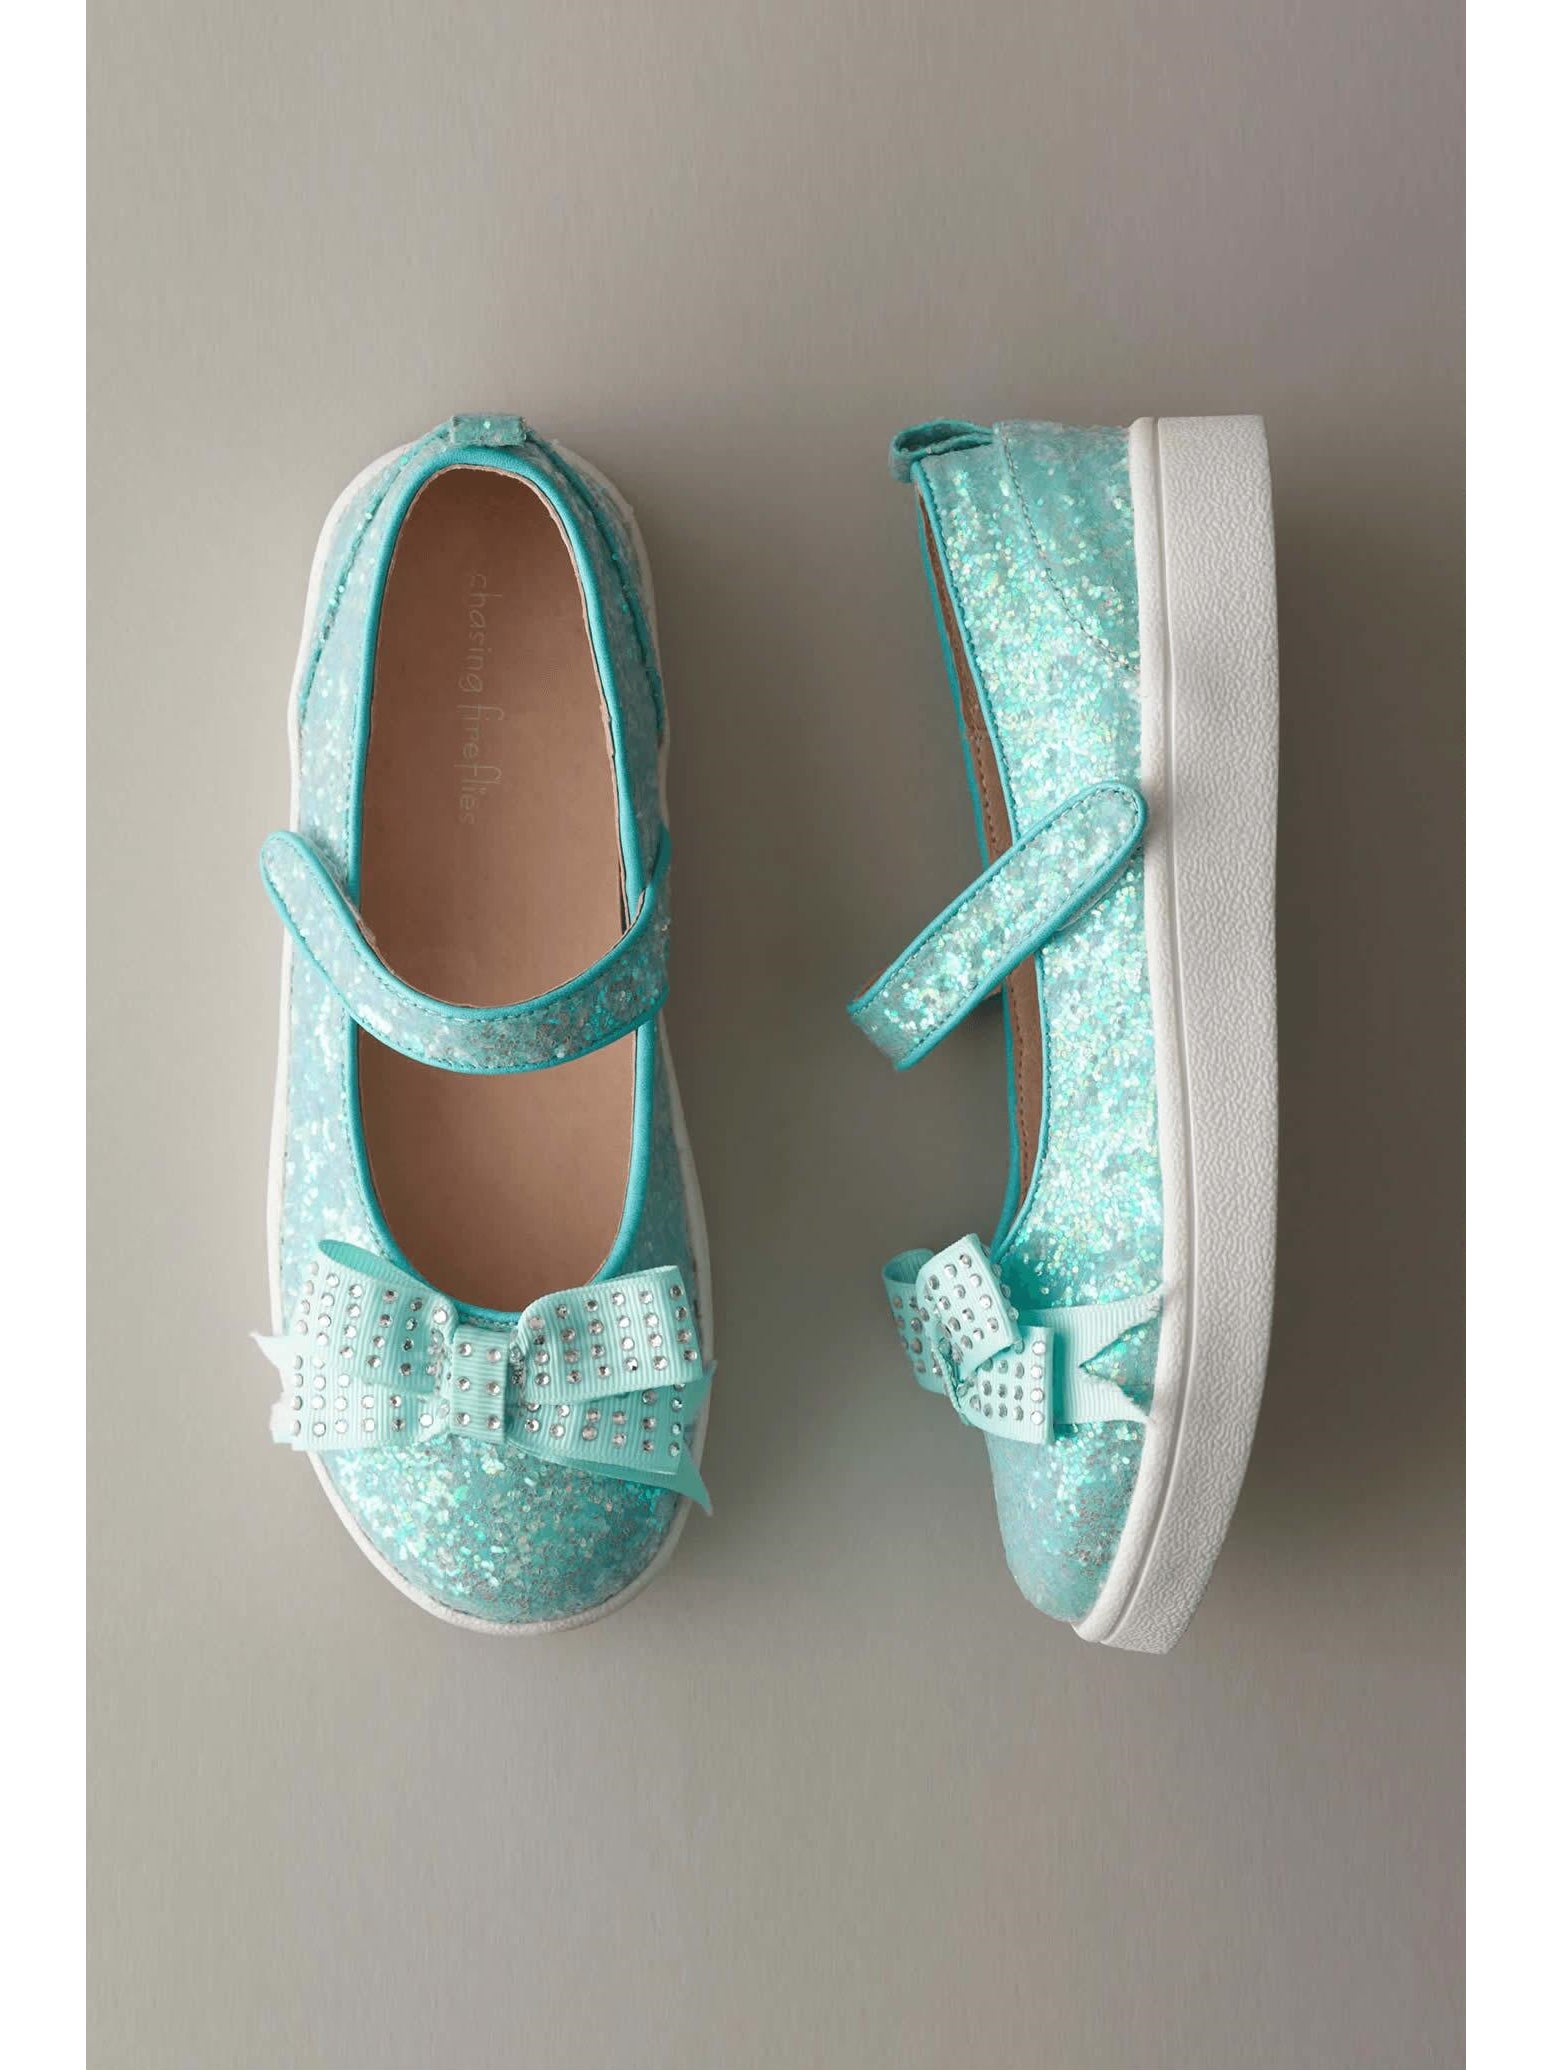 girls sparkle sneakers